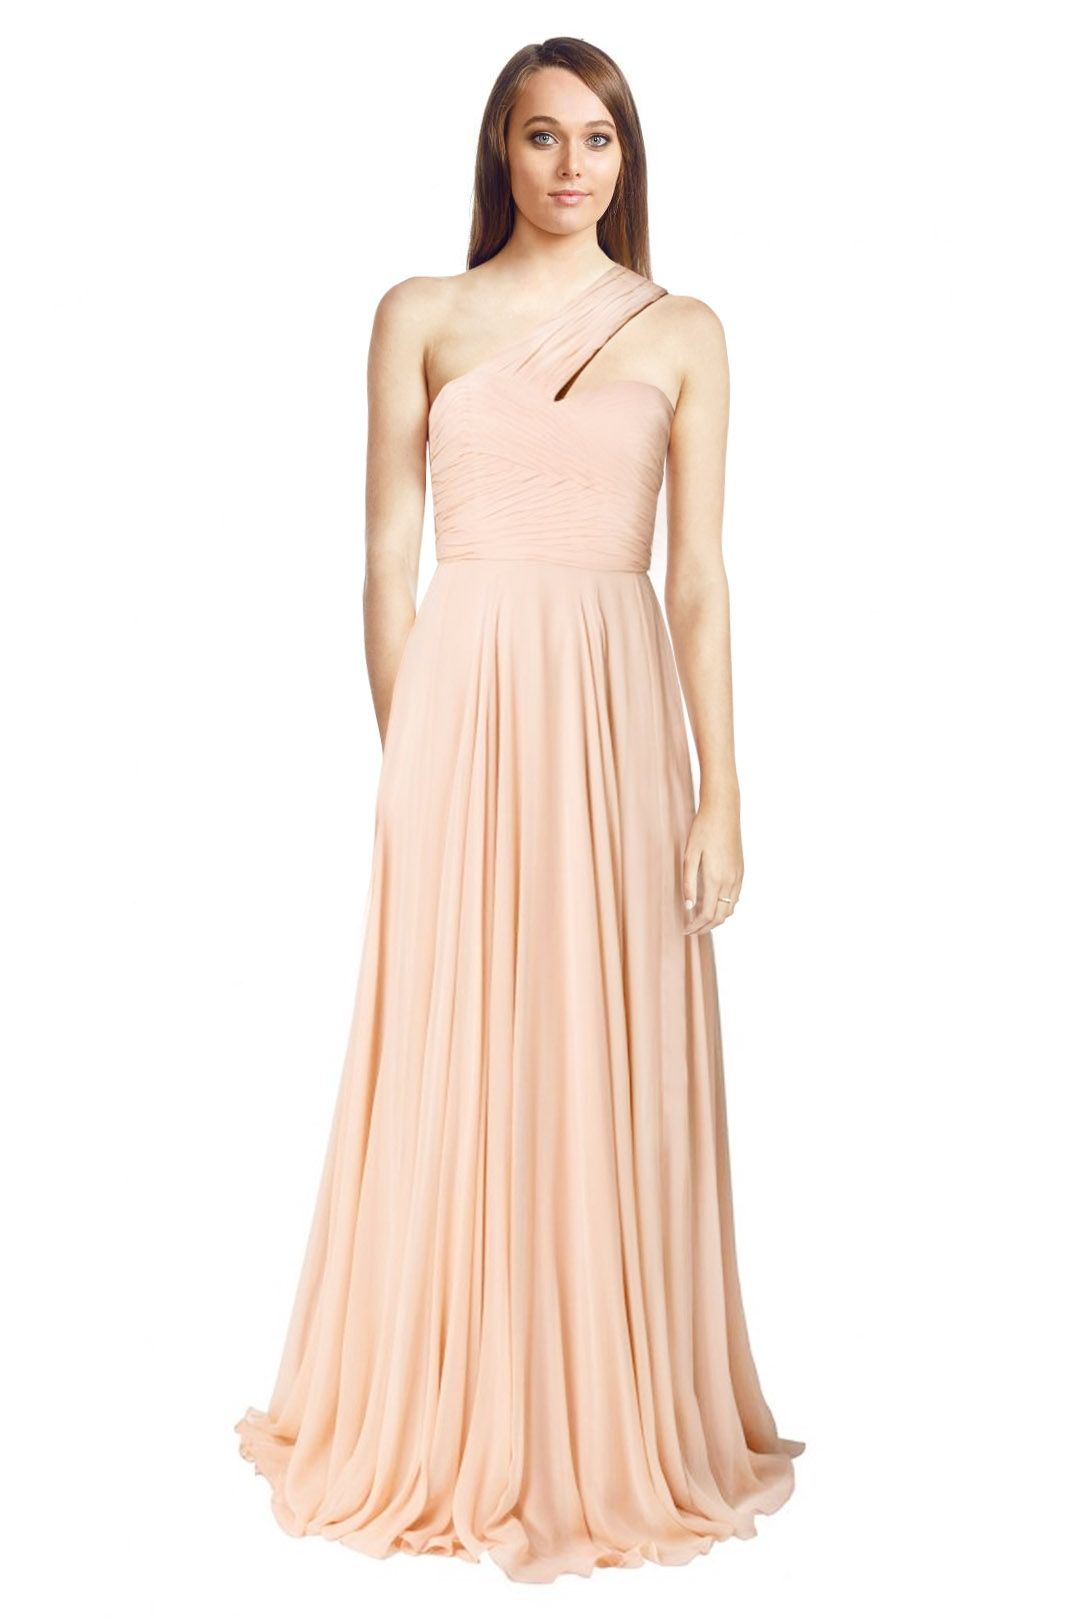 Alex Perry - Vittoria Gown - Blush - Front